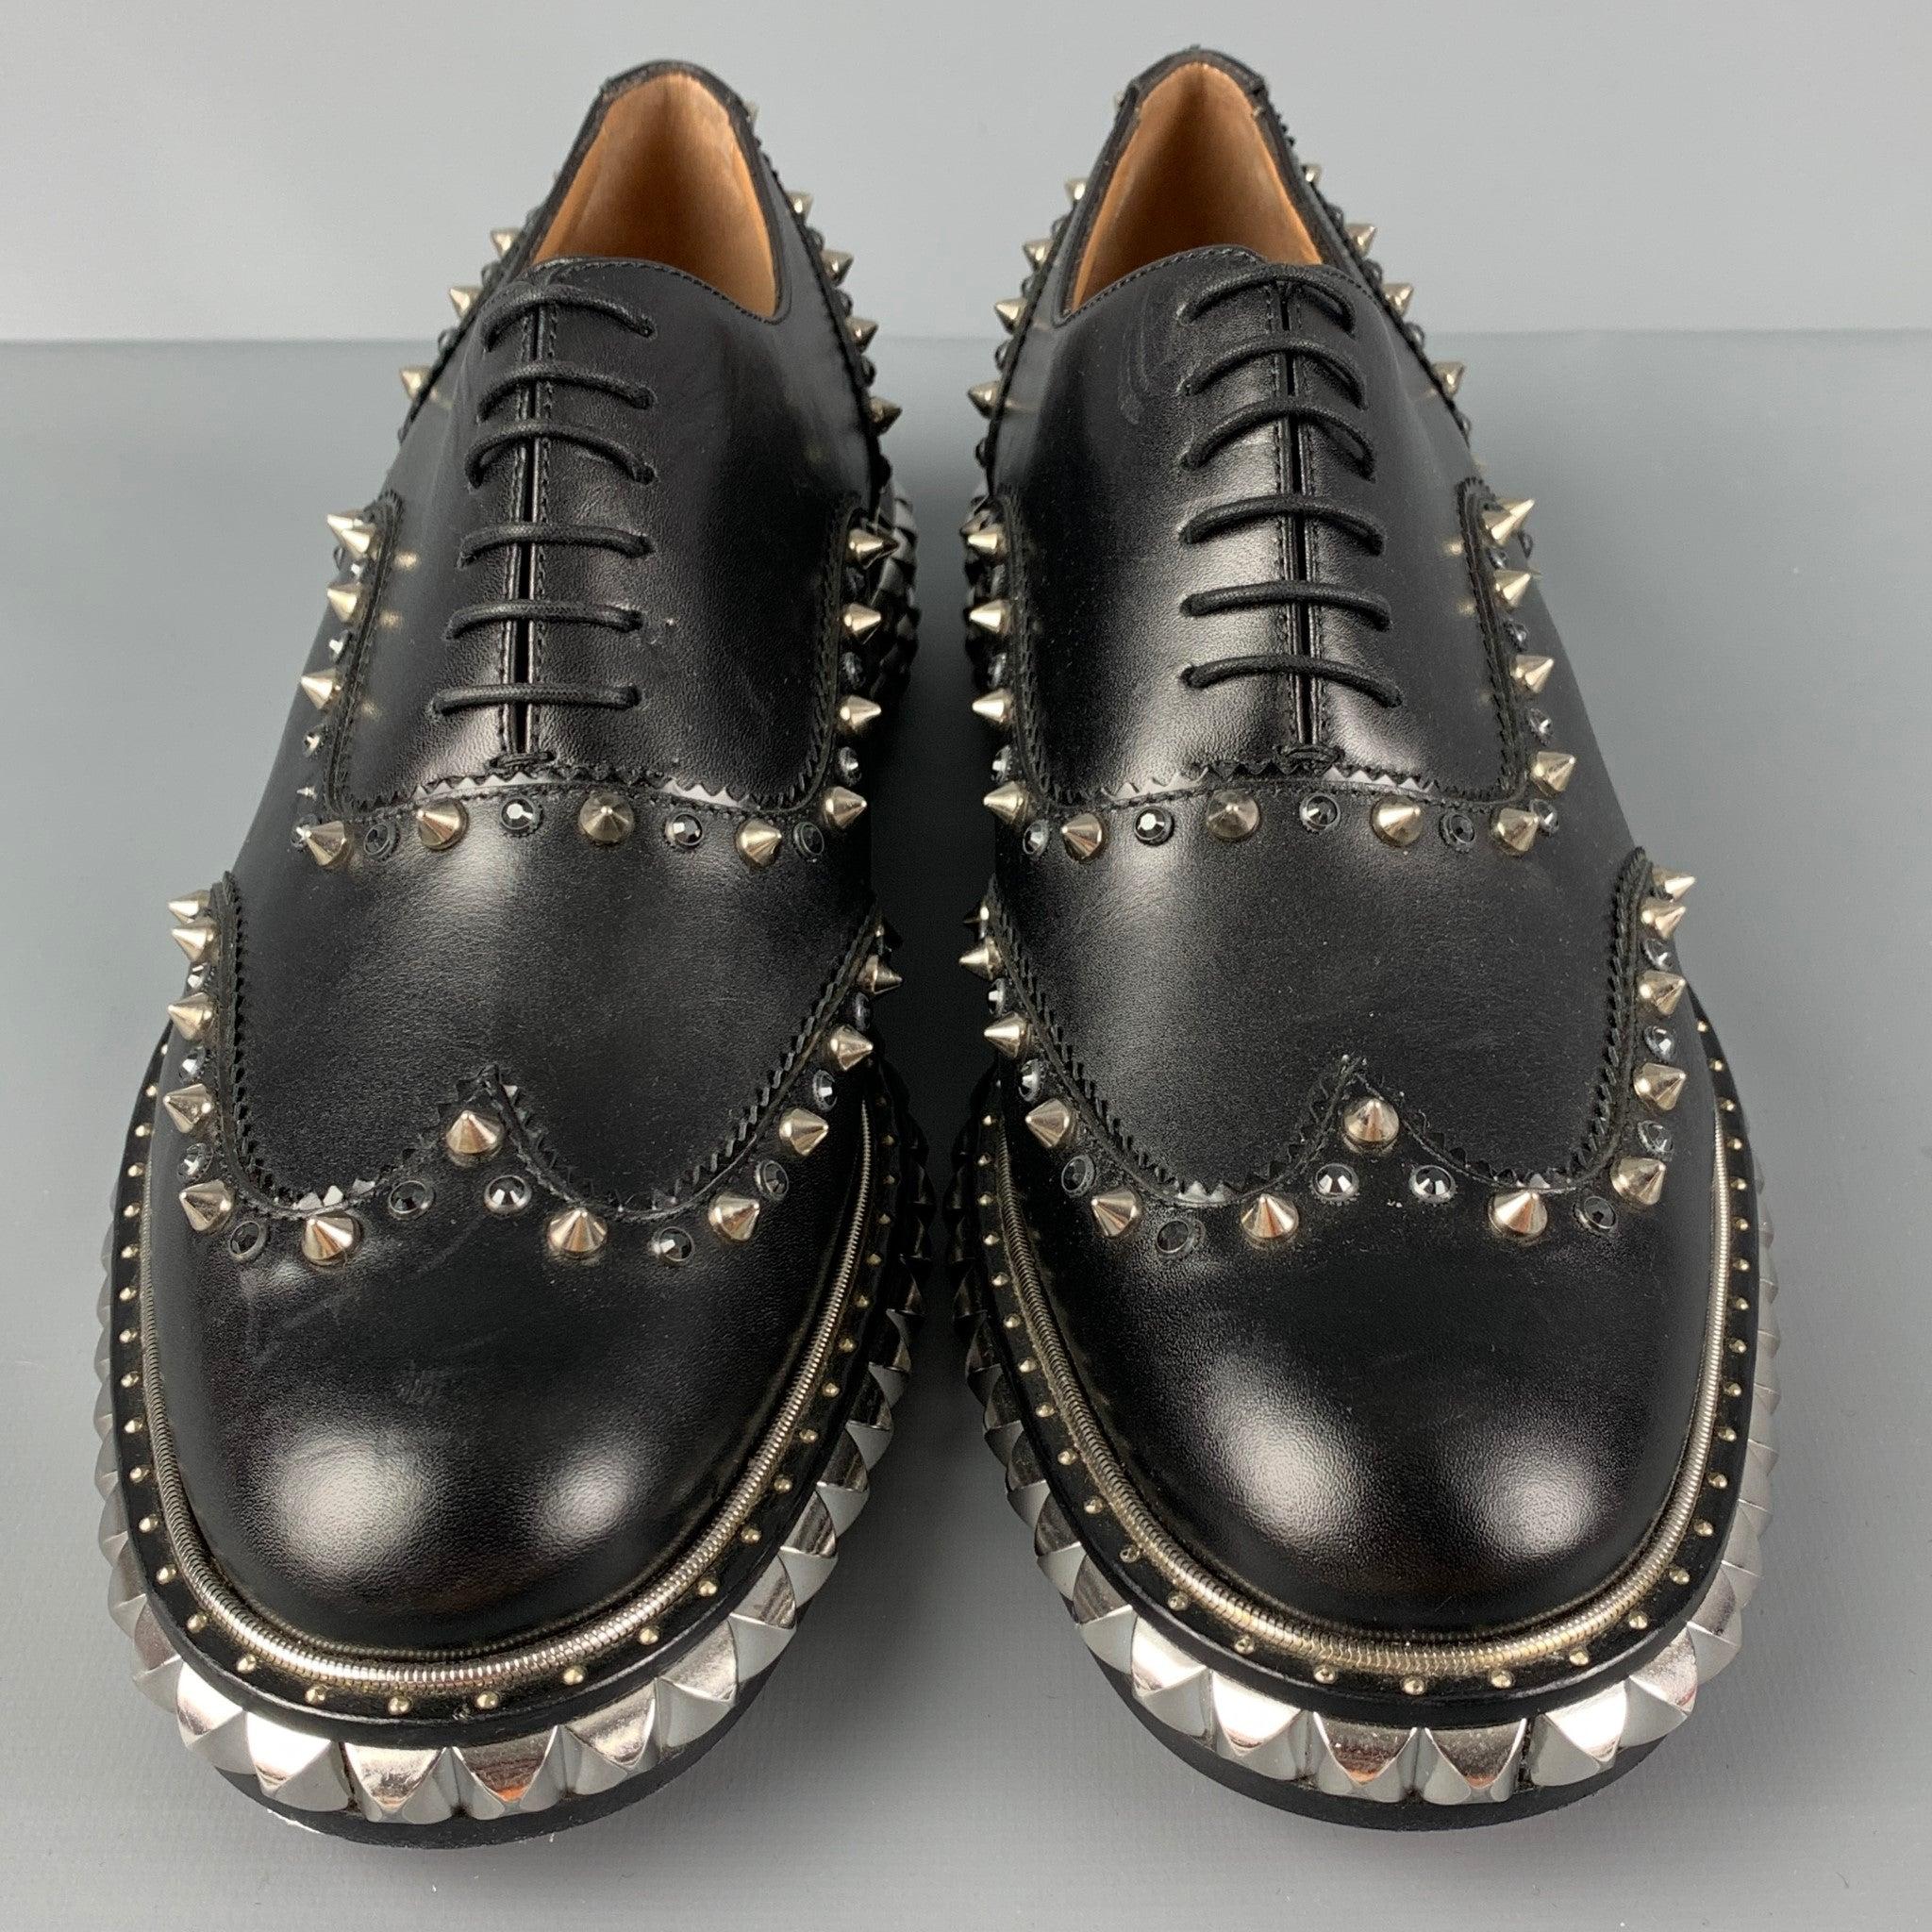 Men's CHRISTIAN LOUBOUTIN Size 8 Black Studded Leather Wingtip Lace Up Shoes For Sale